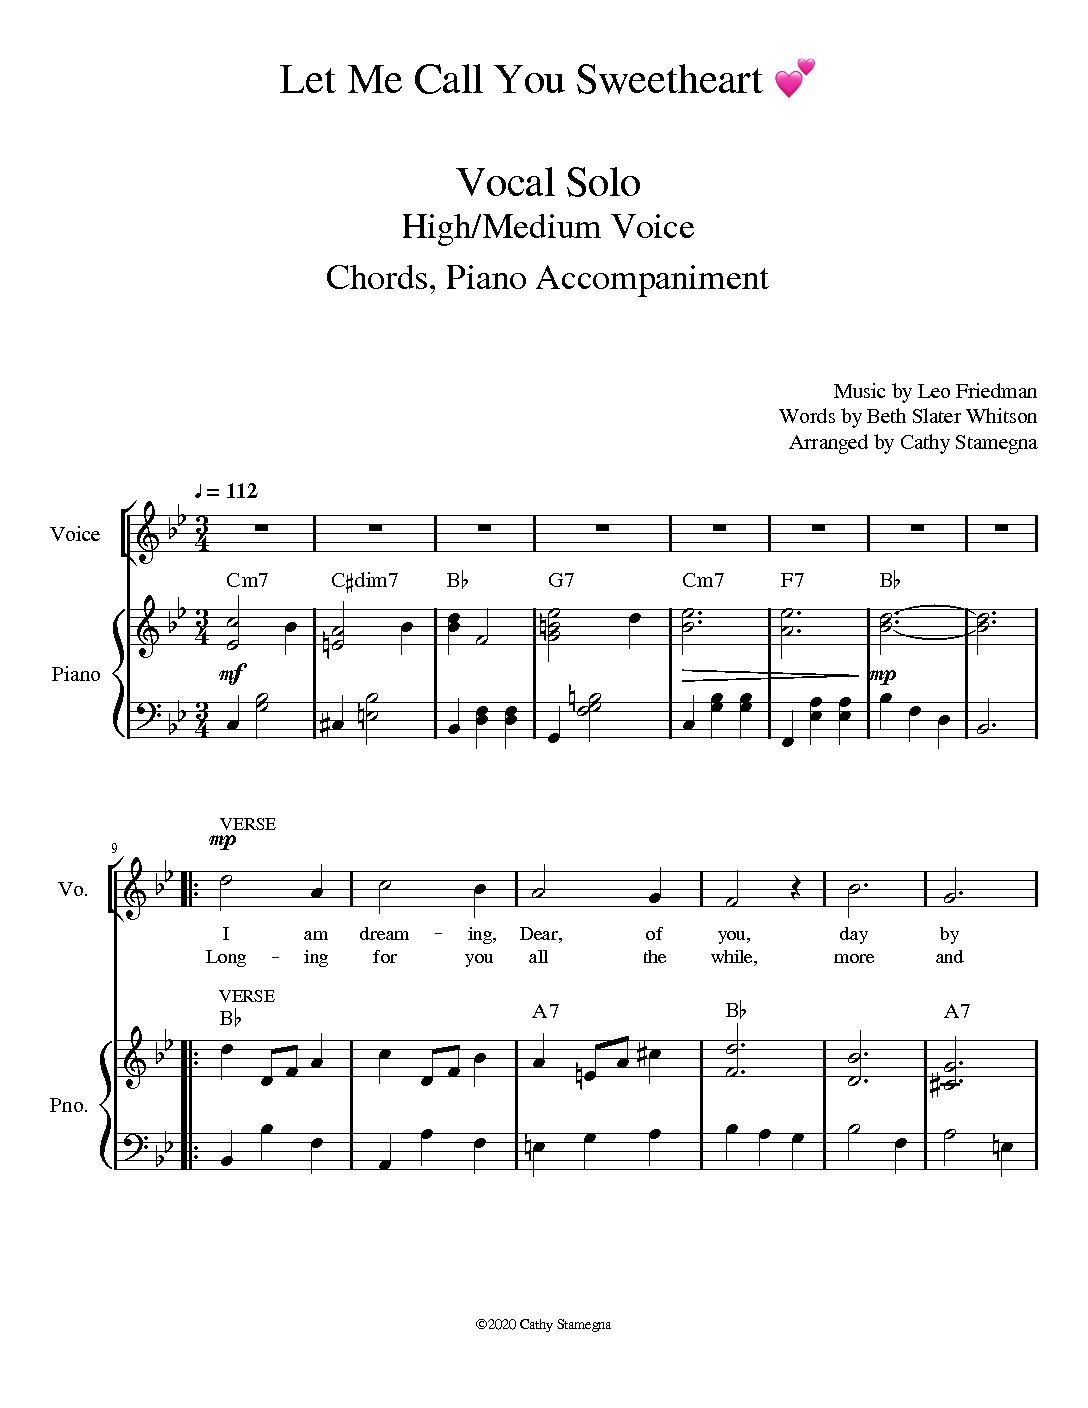 Let Me Call You Sweetheart Vocal Solo High Medium Voice Chords Piano Accompaniment Sheet 